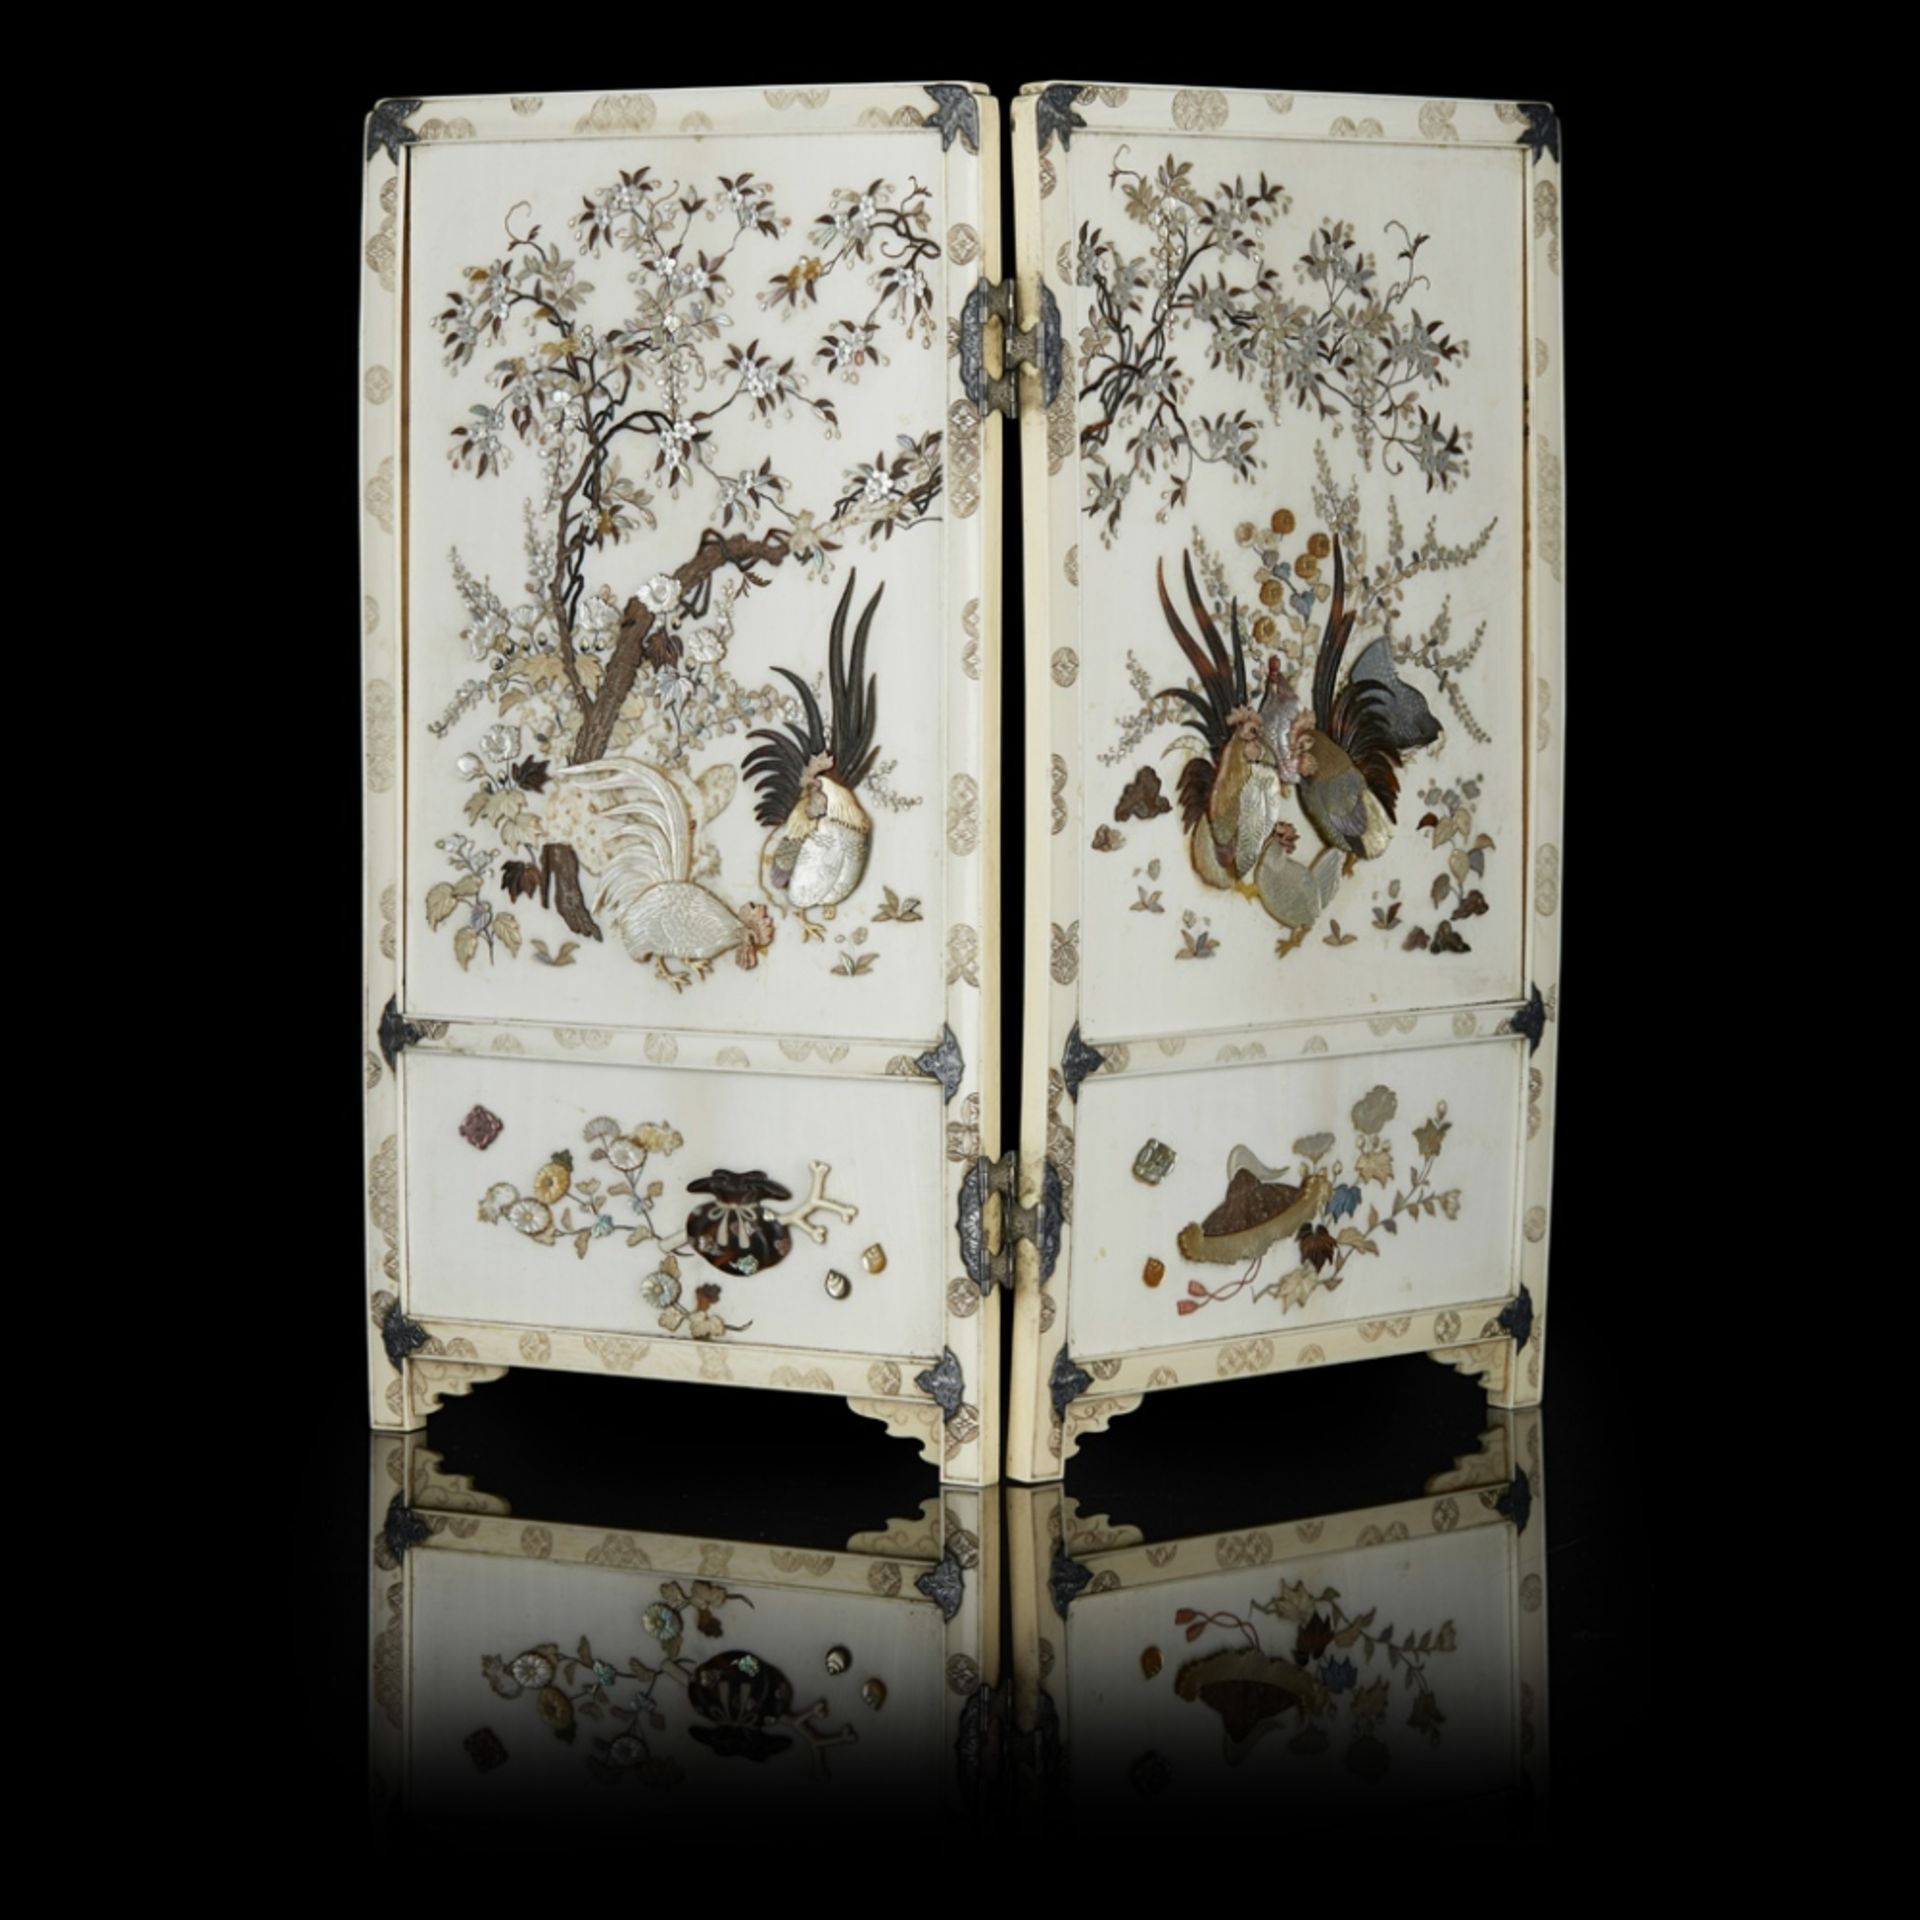 FINE SHIBAYAMA-INLAID IVORY TWO-FOLD SCREENMEIJI PERIOD each fold inlaid in mother-of-pearl,